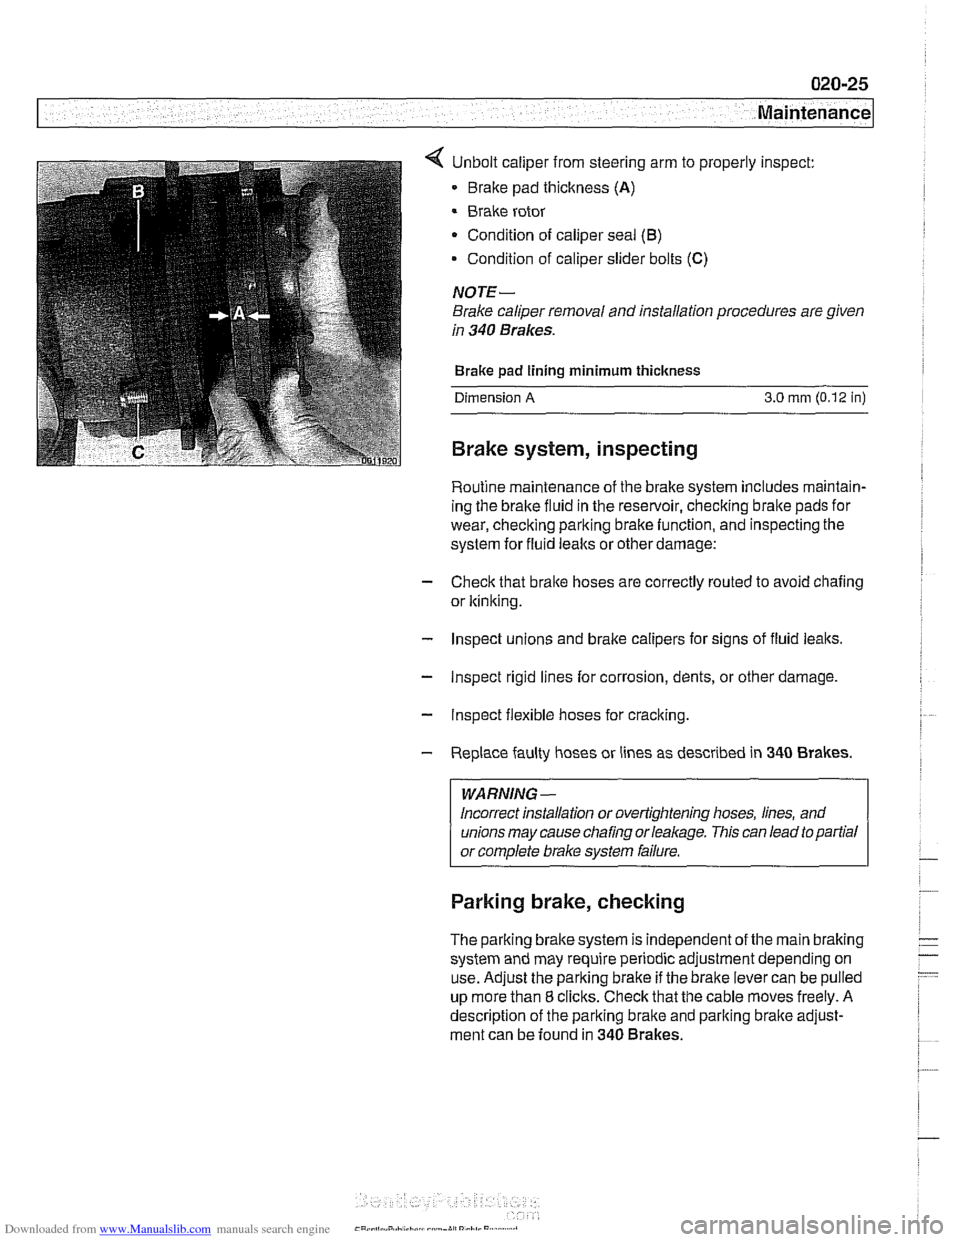 BMW 530i 1999 E39 Workshop Manual Downloaded from www.Manualslib.com manuals search engine 
7 Maintenance 
< Unbolt caliper from steering arm  to properly  inspect: 
Brake  pad thickness 
(A) 
Brake rotor 
Condition  of caliper seal 
